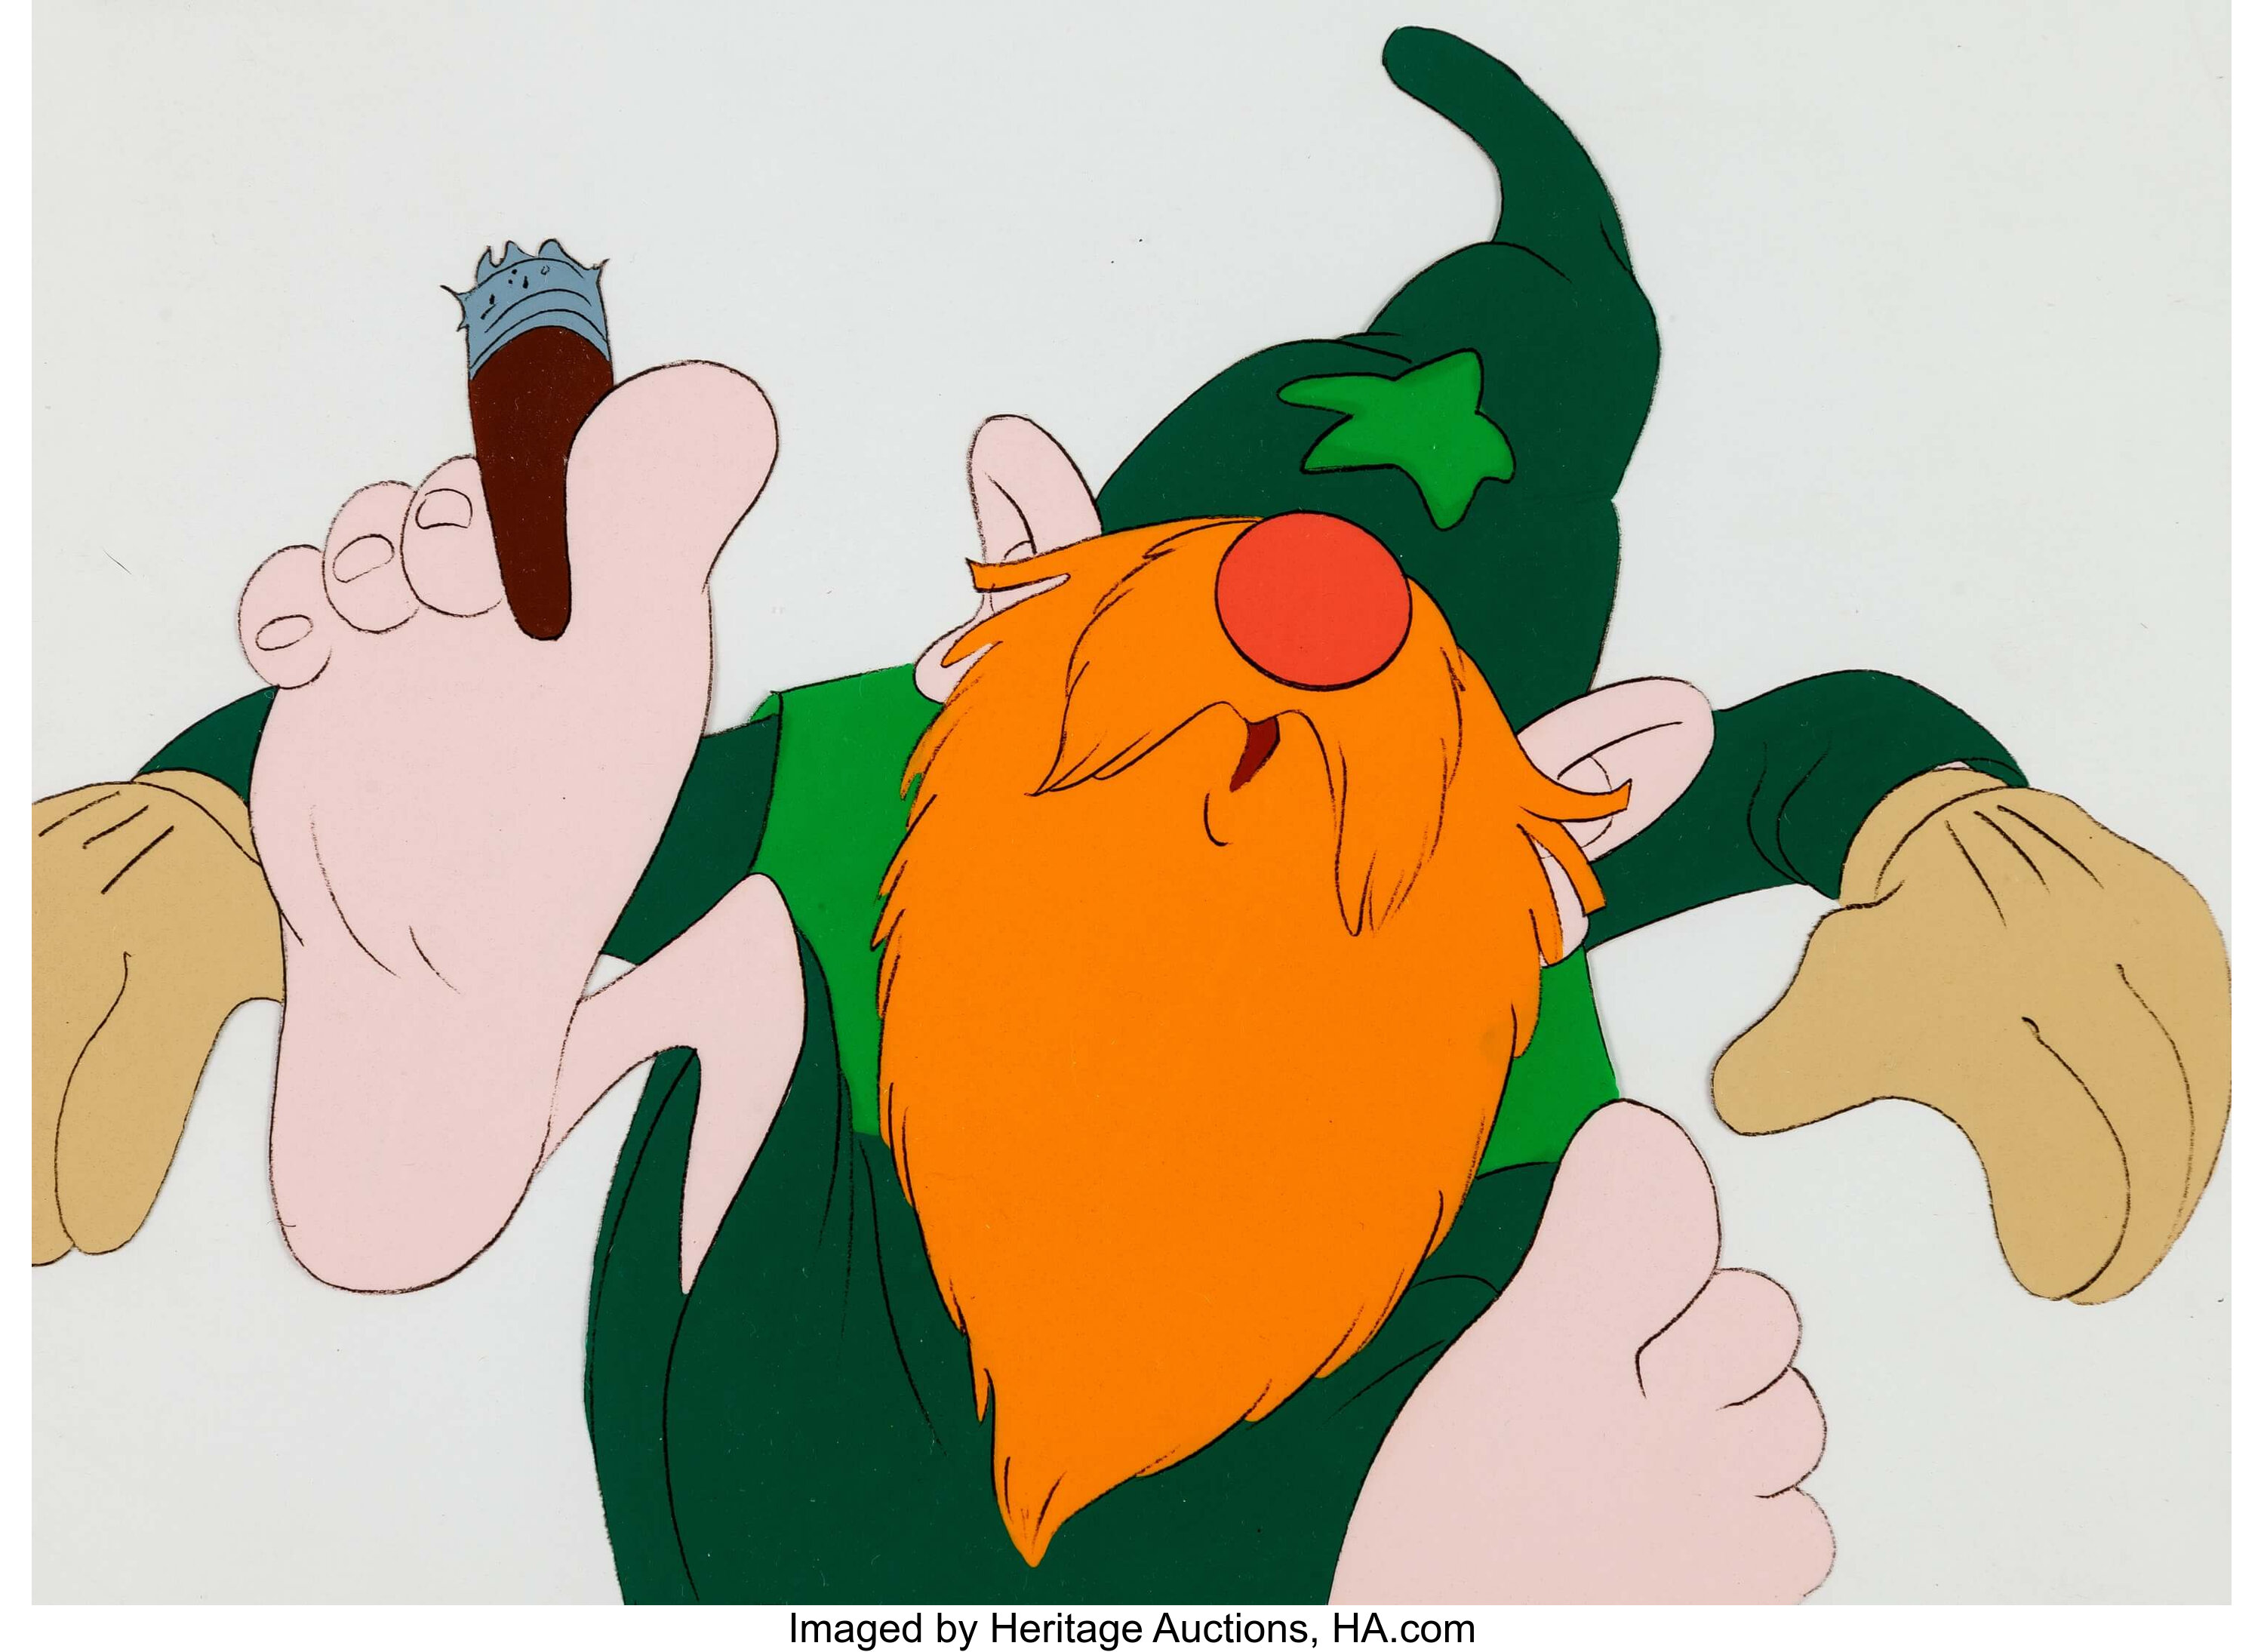 Wizards Avatar The Wizard Production Cel Ralph Bakshi Fox Lot 11197 Heritage Auctions